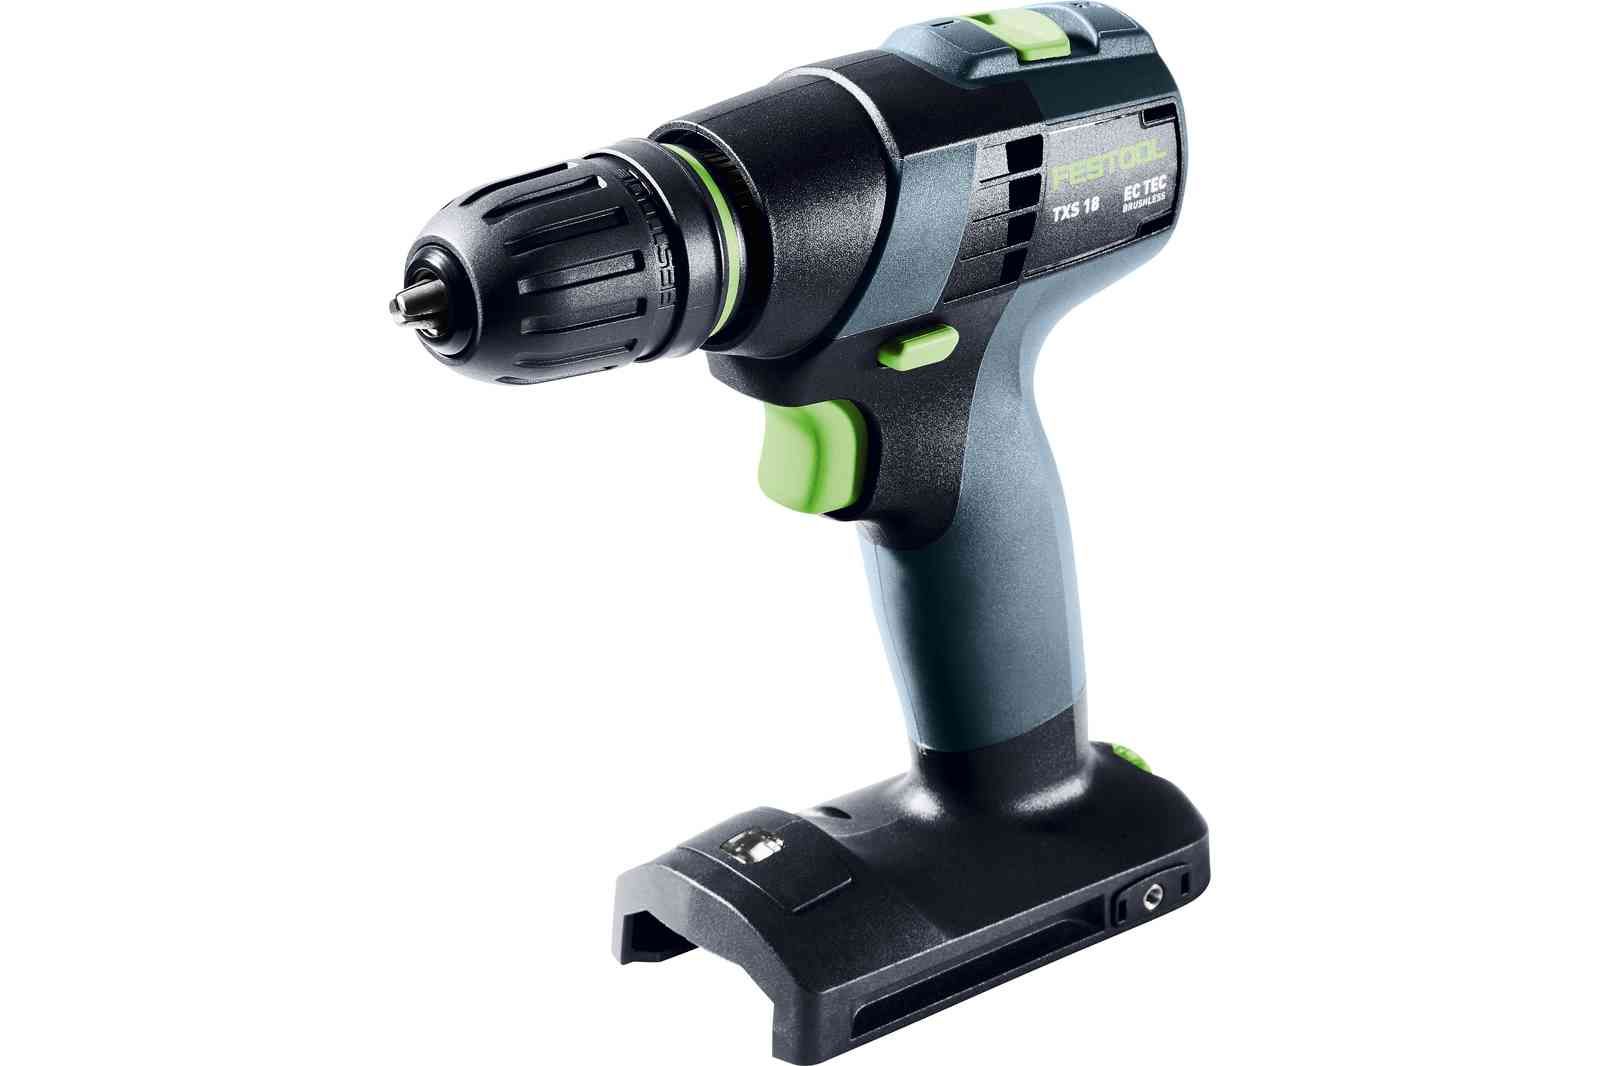 TXS 18V Cordless Compact 2 Speed Drill 5.2Ah Set in Systainer Kit 576895 by Festool